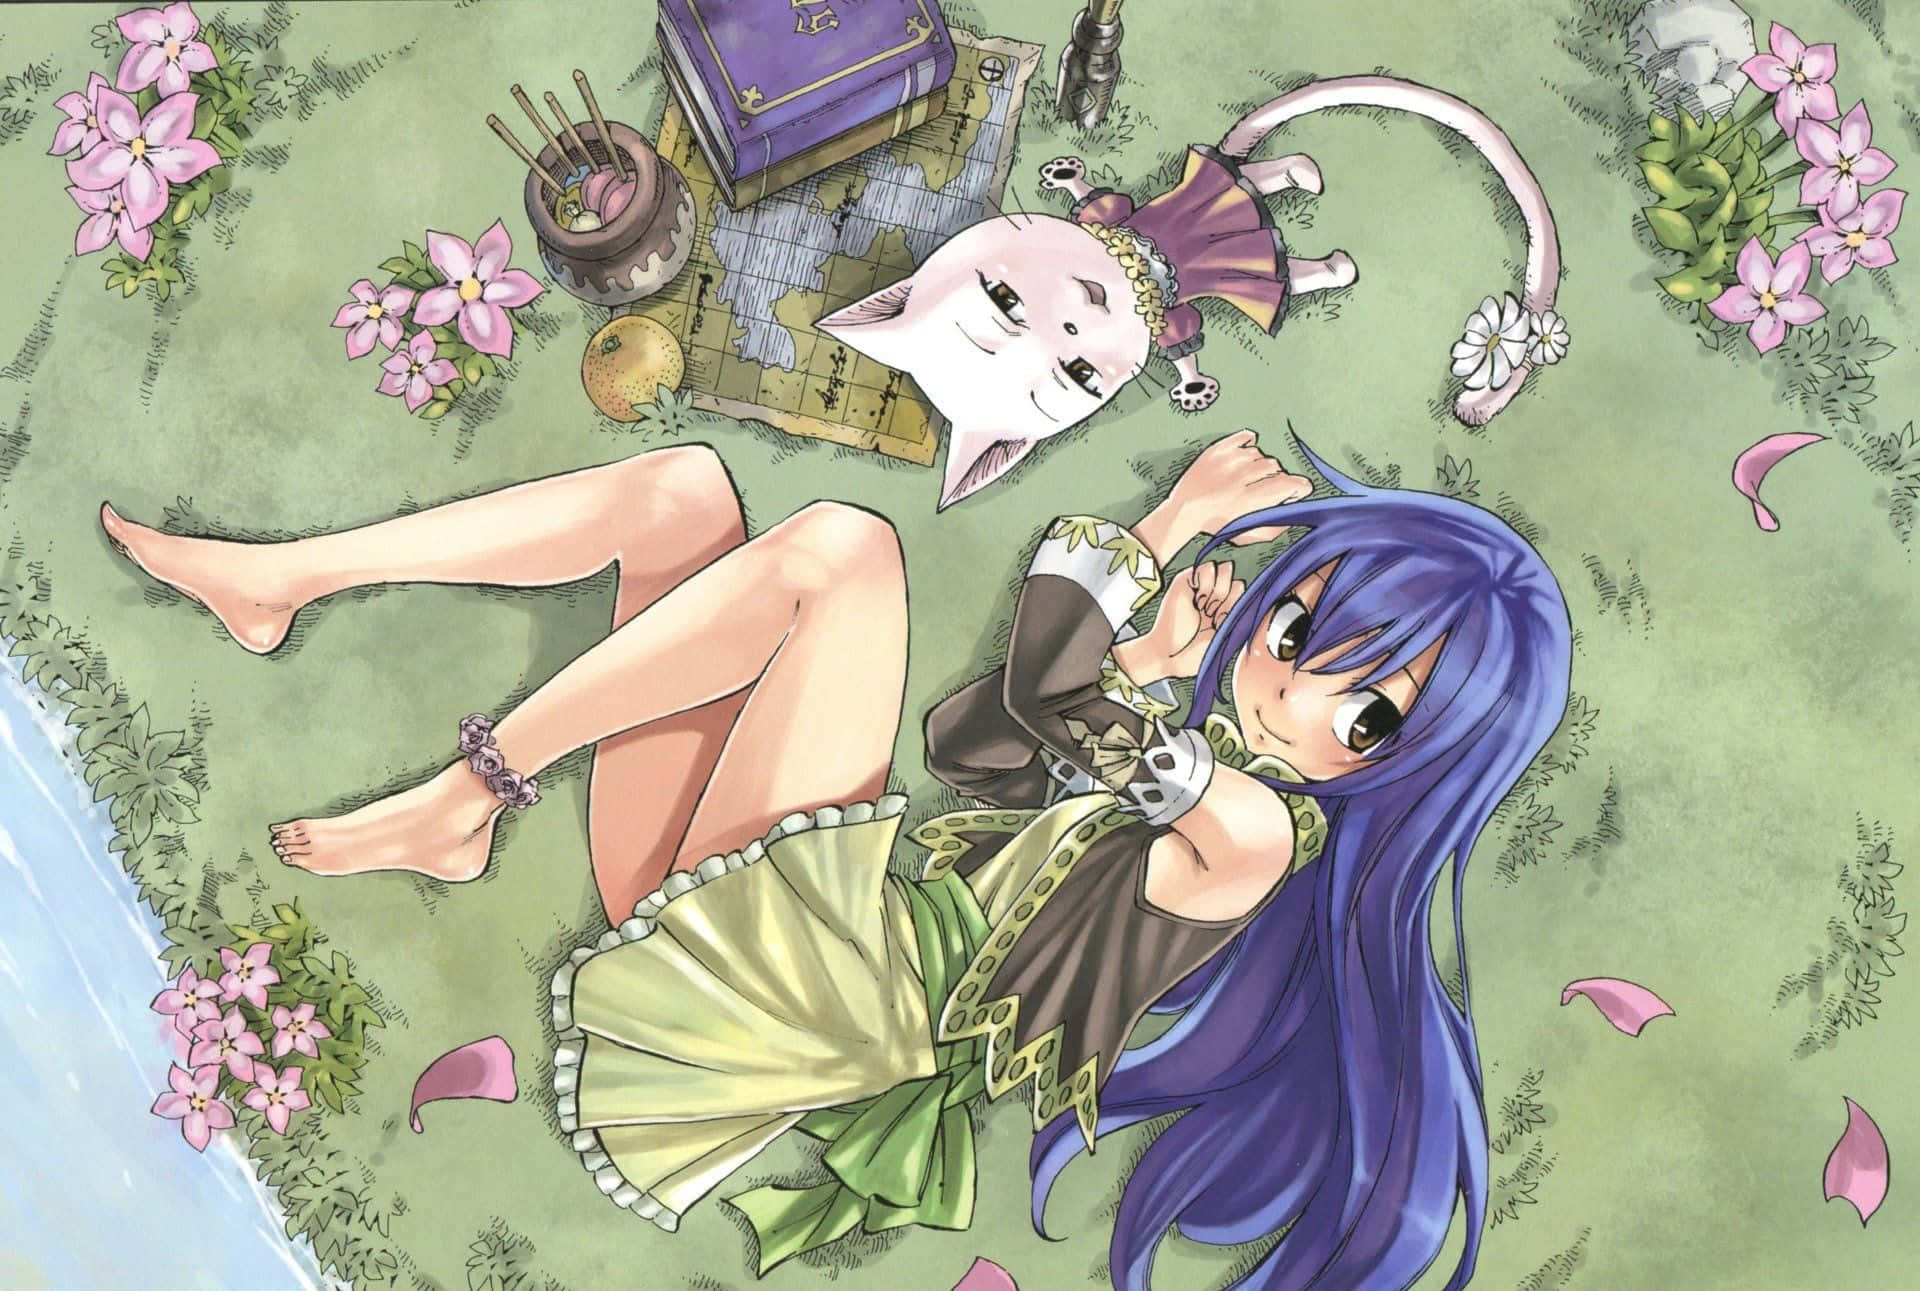 Caption: Sorceress Wendy Marvell performing a magical attack Wallpaper